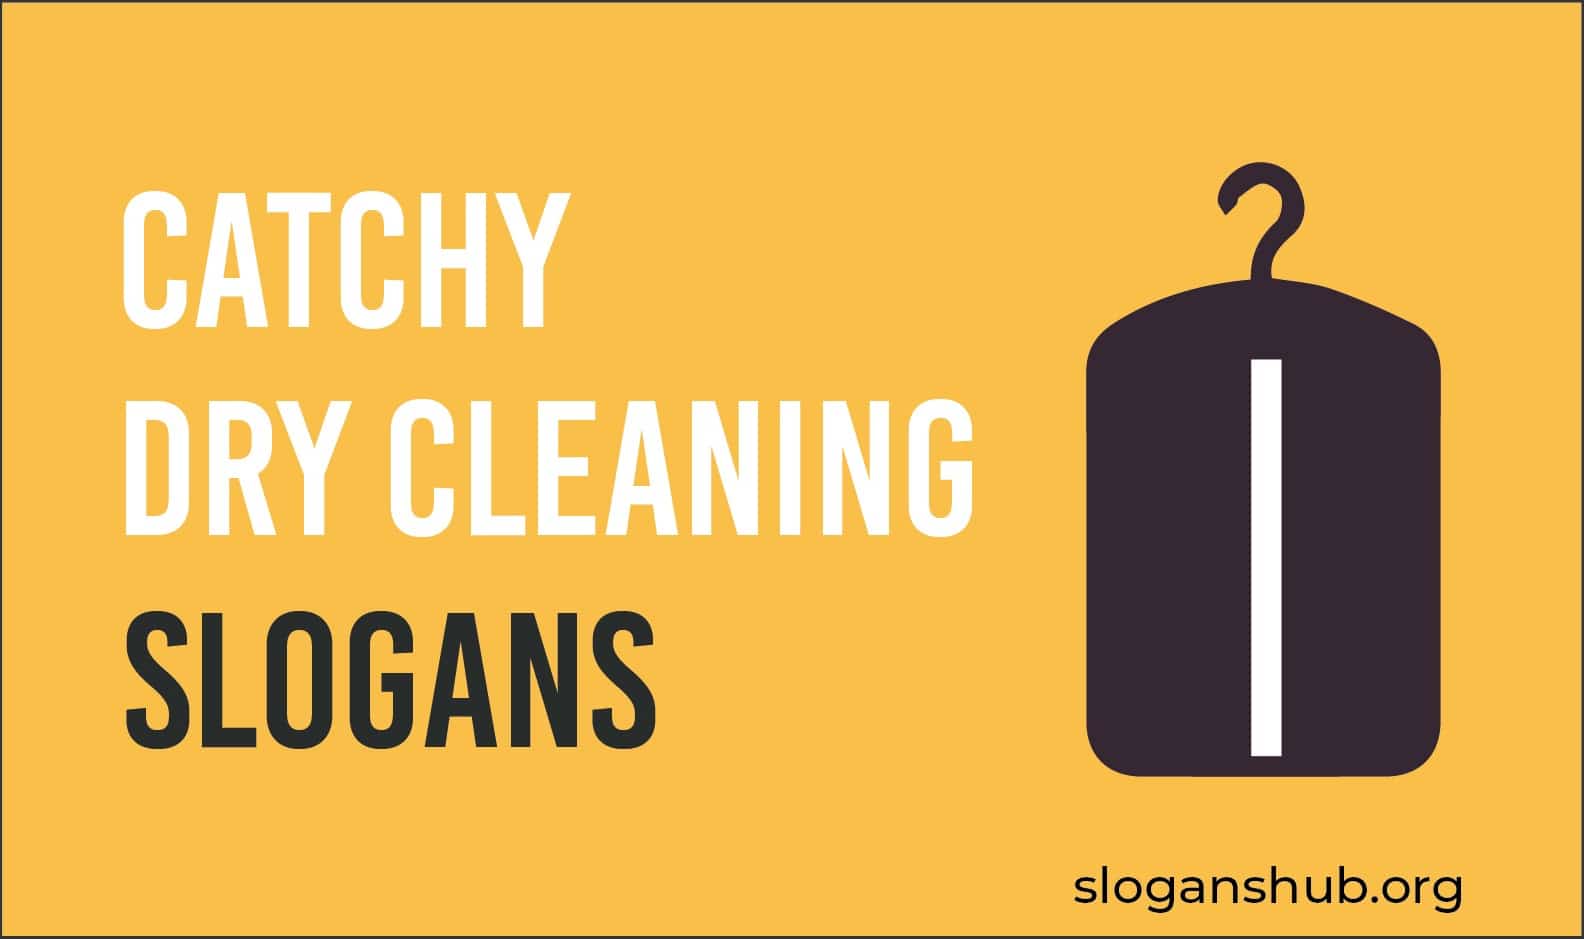 50 Catchy Dry Cleaning Slogans and Taglines